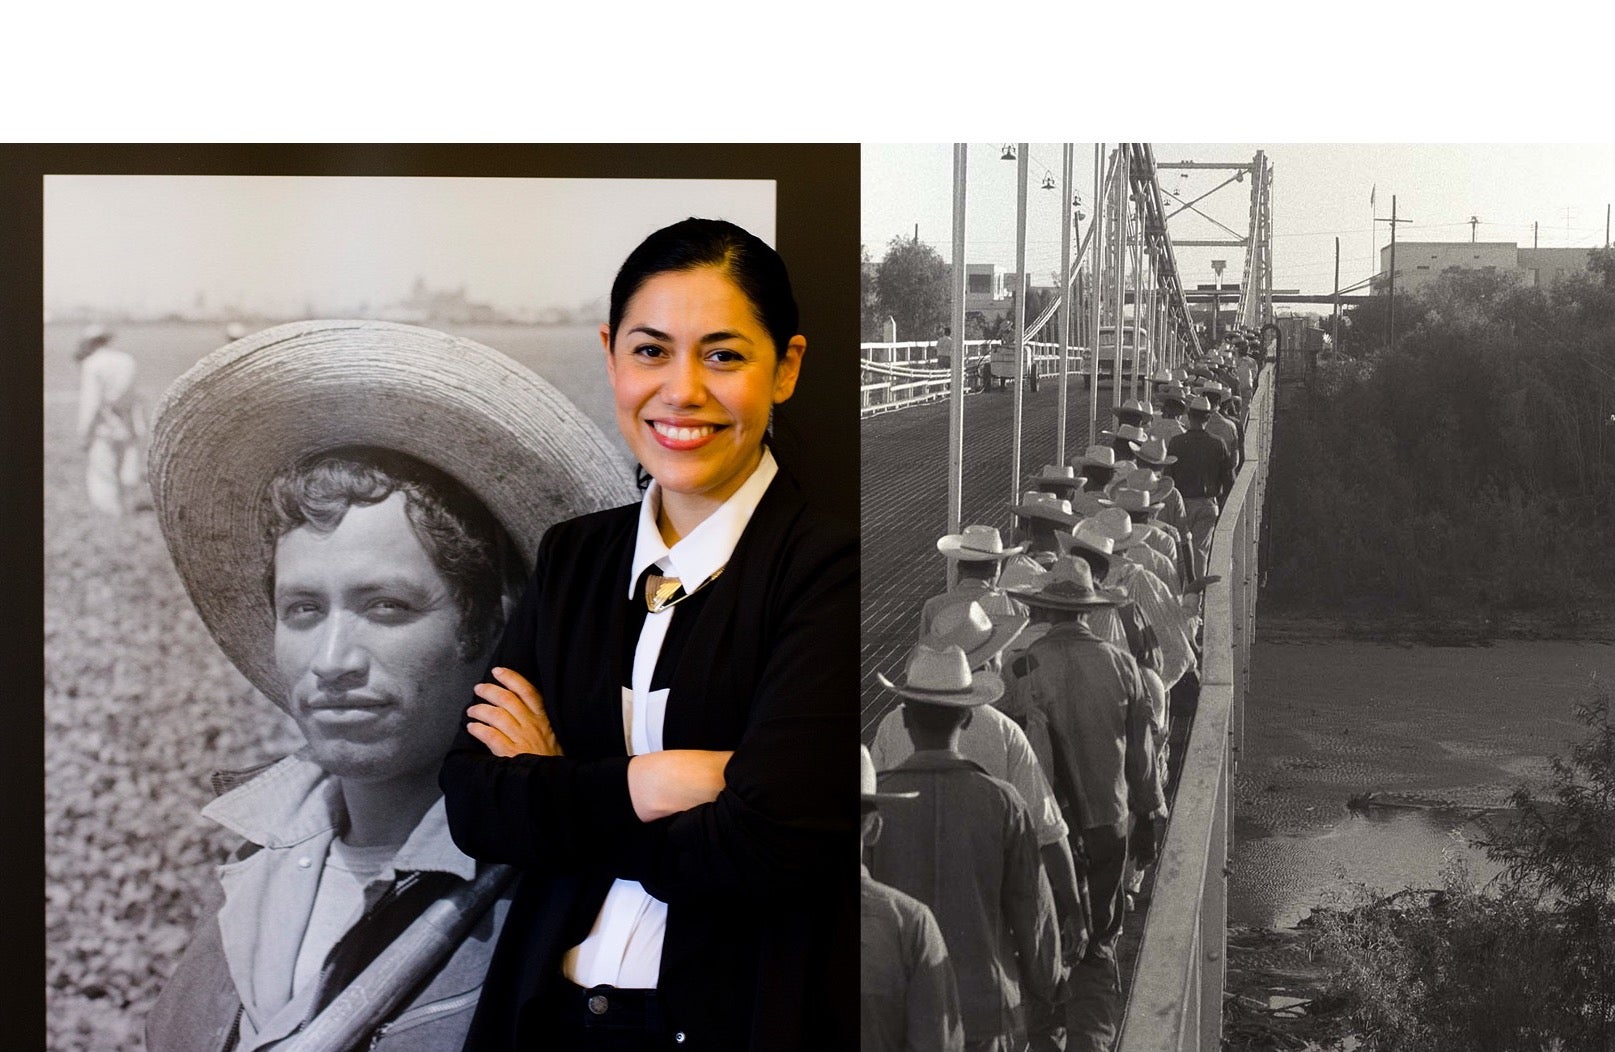 On the left, a woman in formal attire stands in front of a black-and-white photo of a man wearing a wide-brimmed straw hat. On the right, a black-and-white photo showing a line of men in hats walking across a bridge.